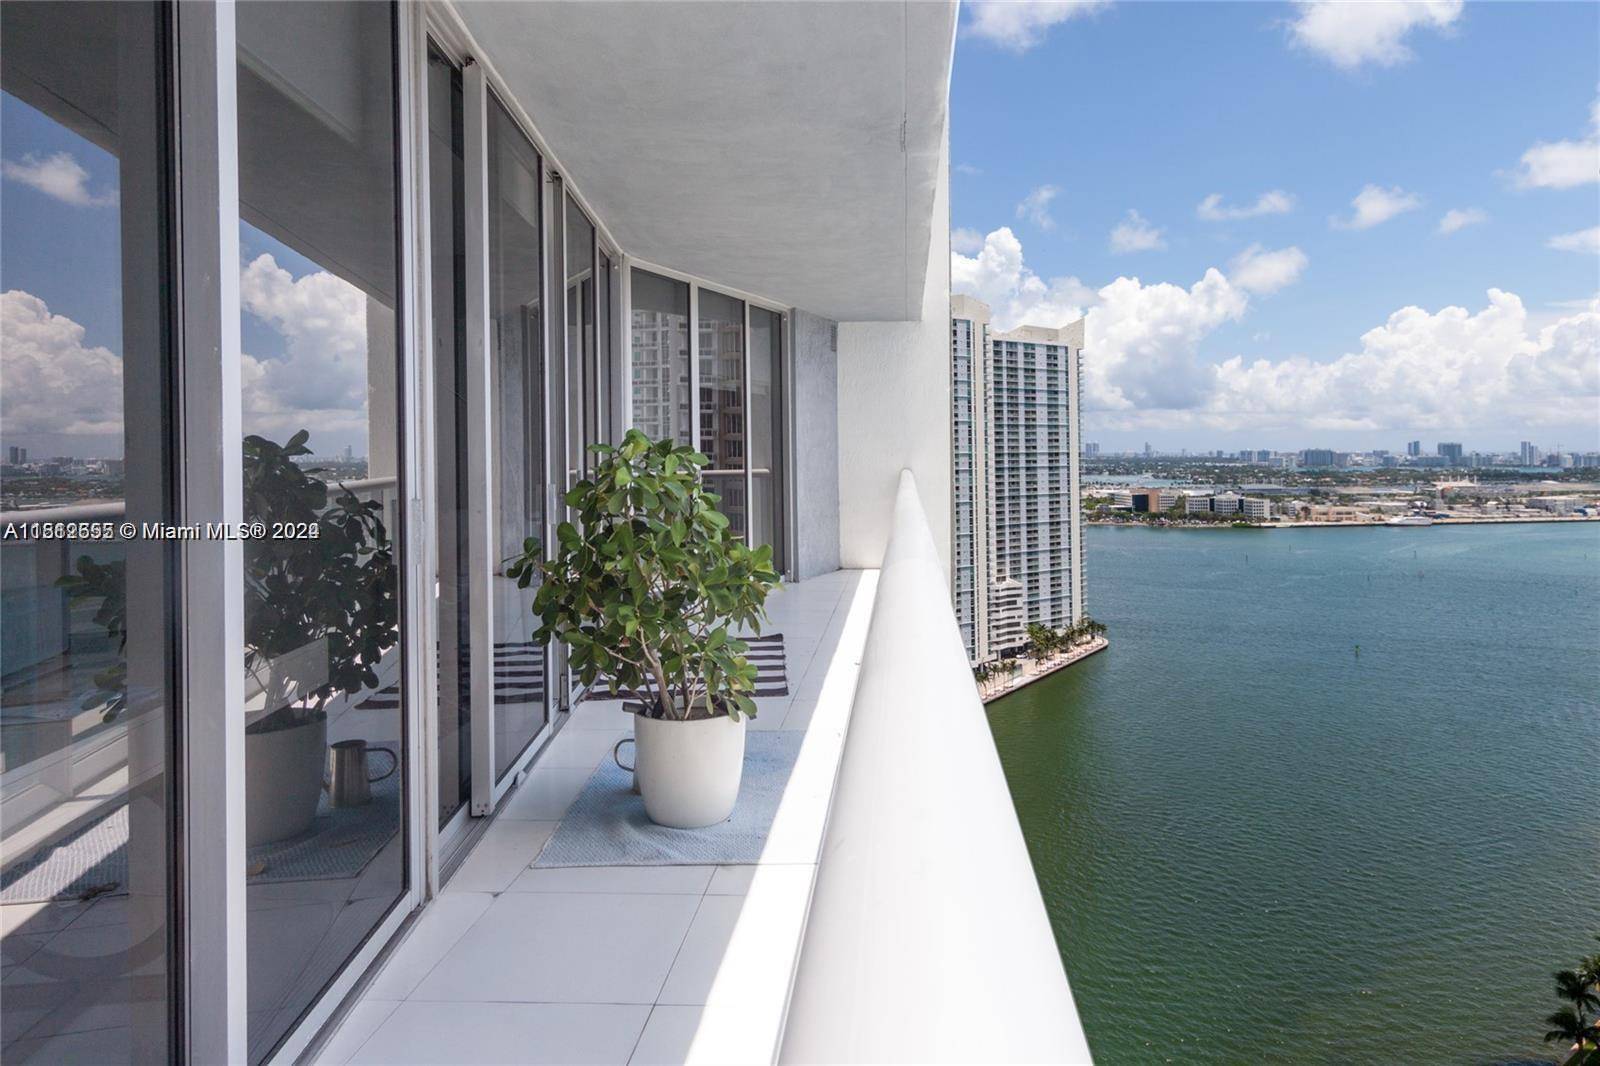 This spacious furnished 2 bedroom, 2 bathroom Den unit at Icon Brickell offers fantastic water views and an amazing space to call home.